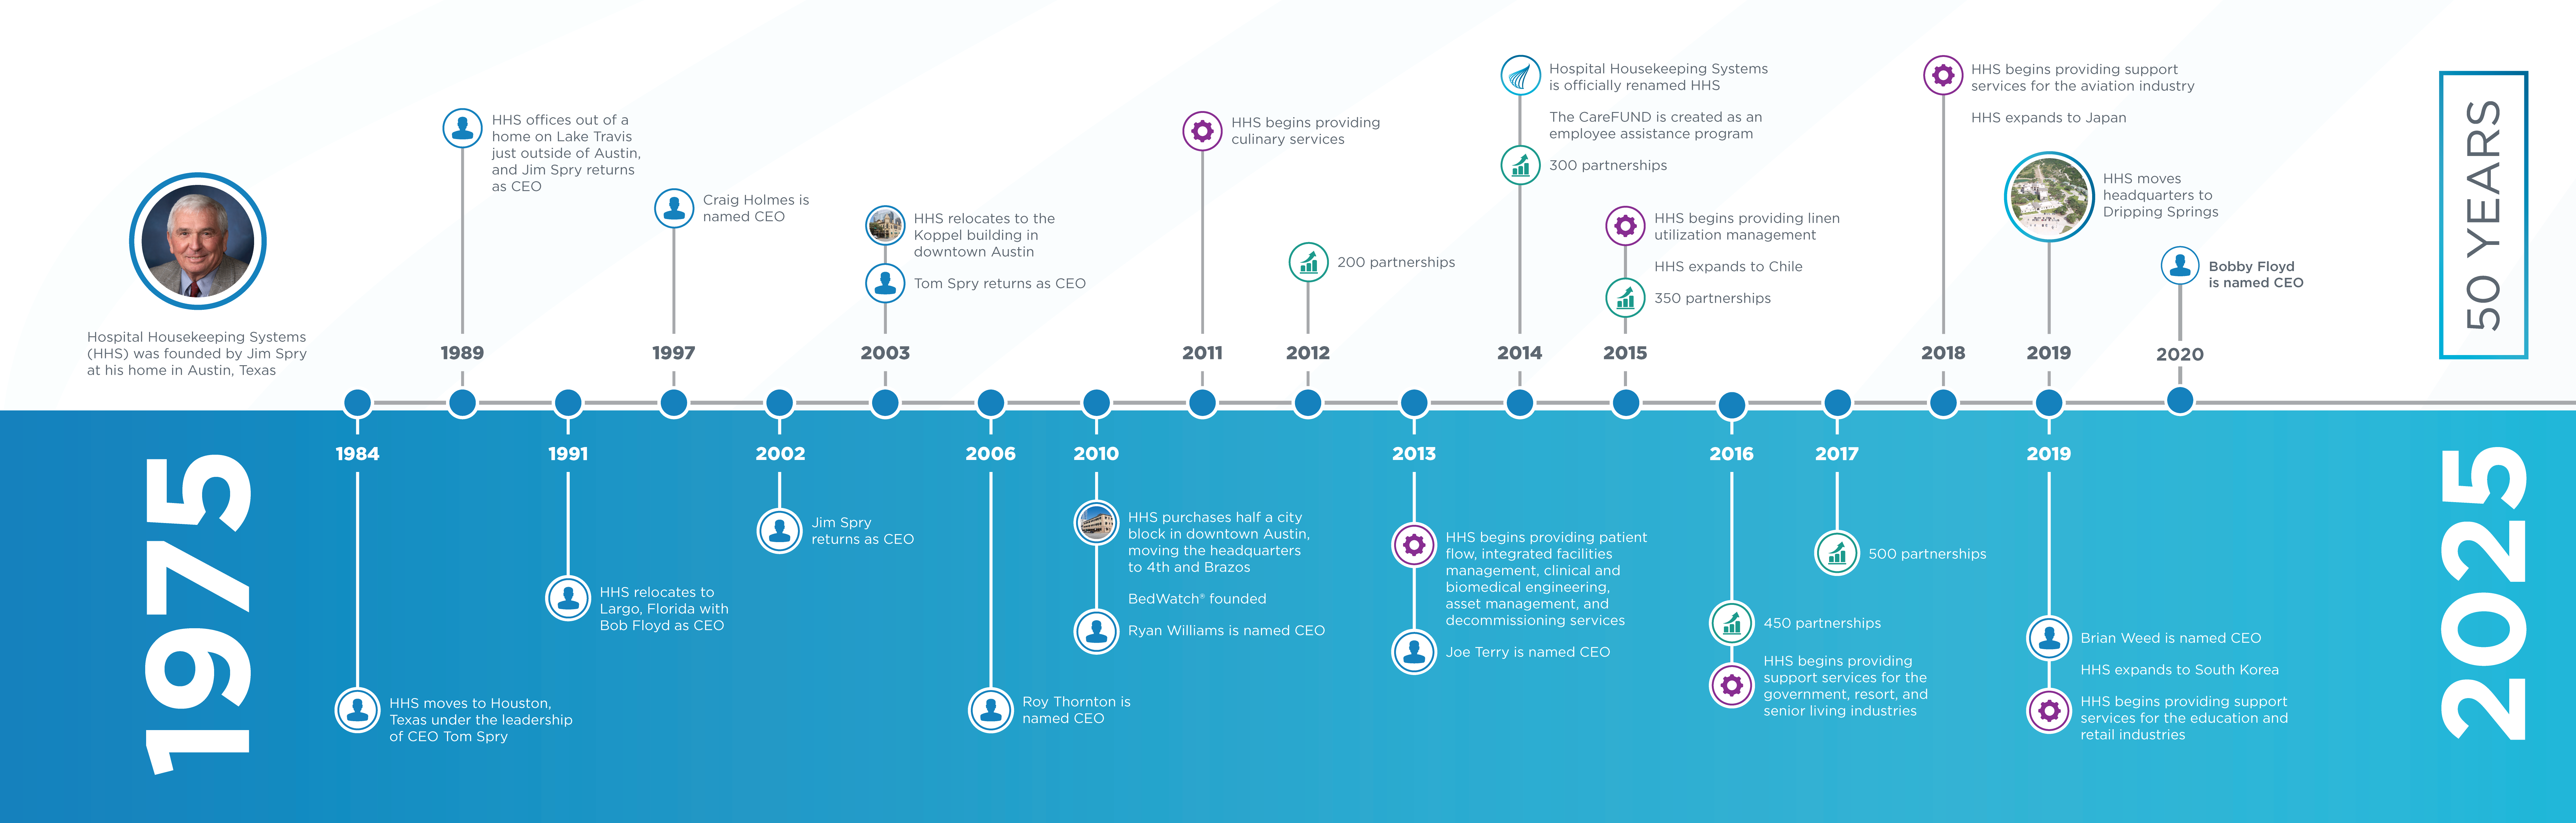 hhs timeline from 1975 to 2020